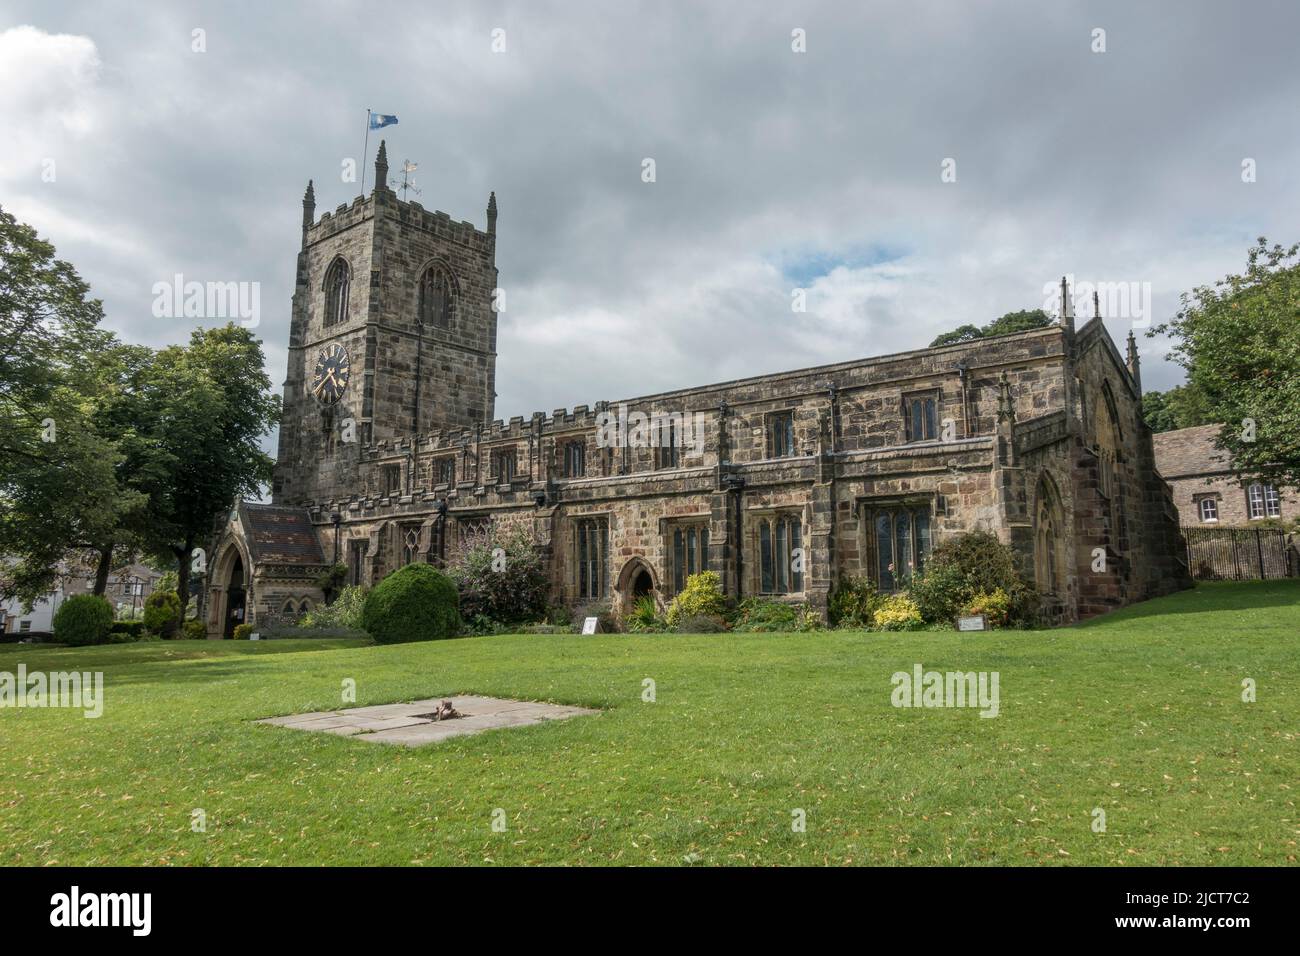 Holy Trinity Church in the market town of Skipton, North Yorkshire, UK. Stock Photo